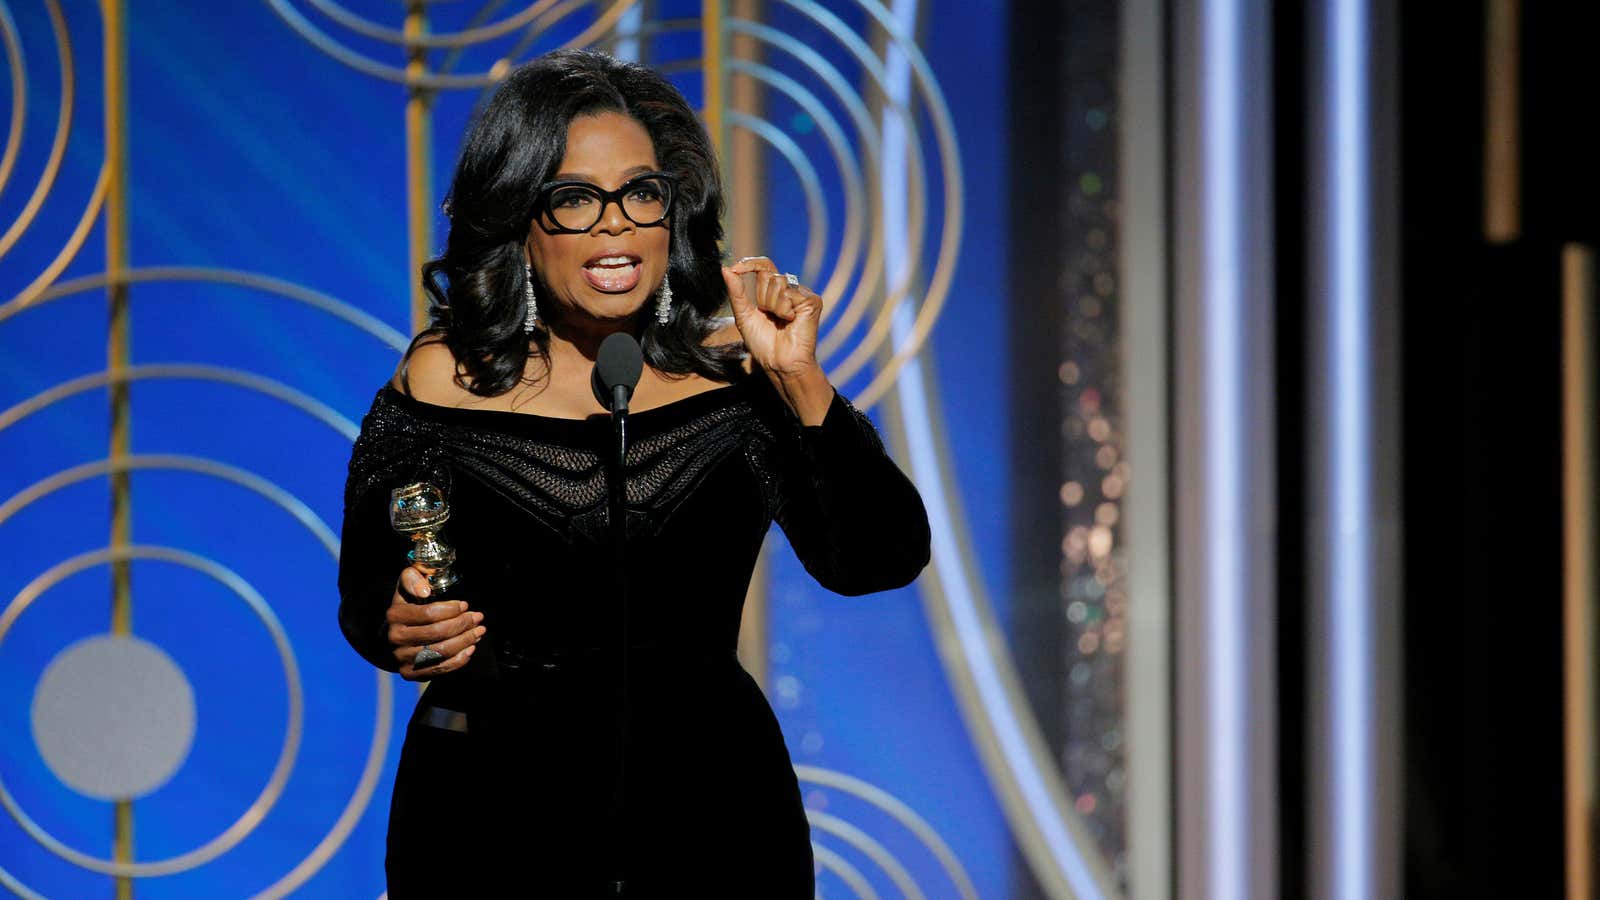 Oprah spoke for more than eight minutes without lying, attacking the free press, praising Vladamir Putin, or riffing on the size of her button.